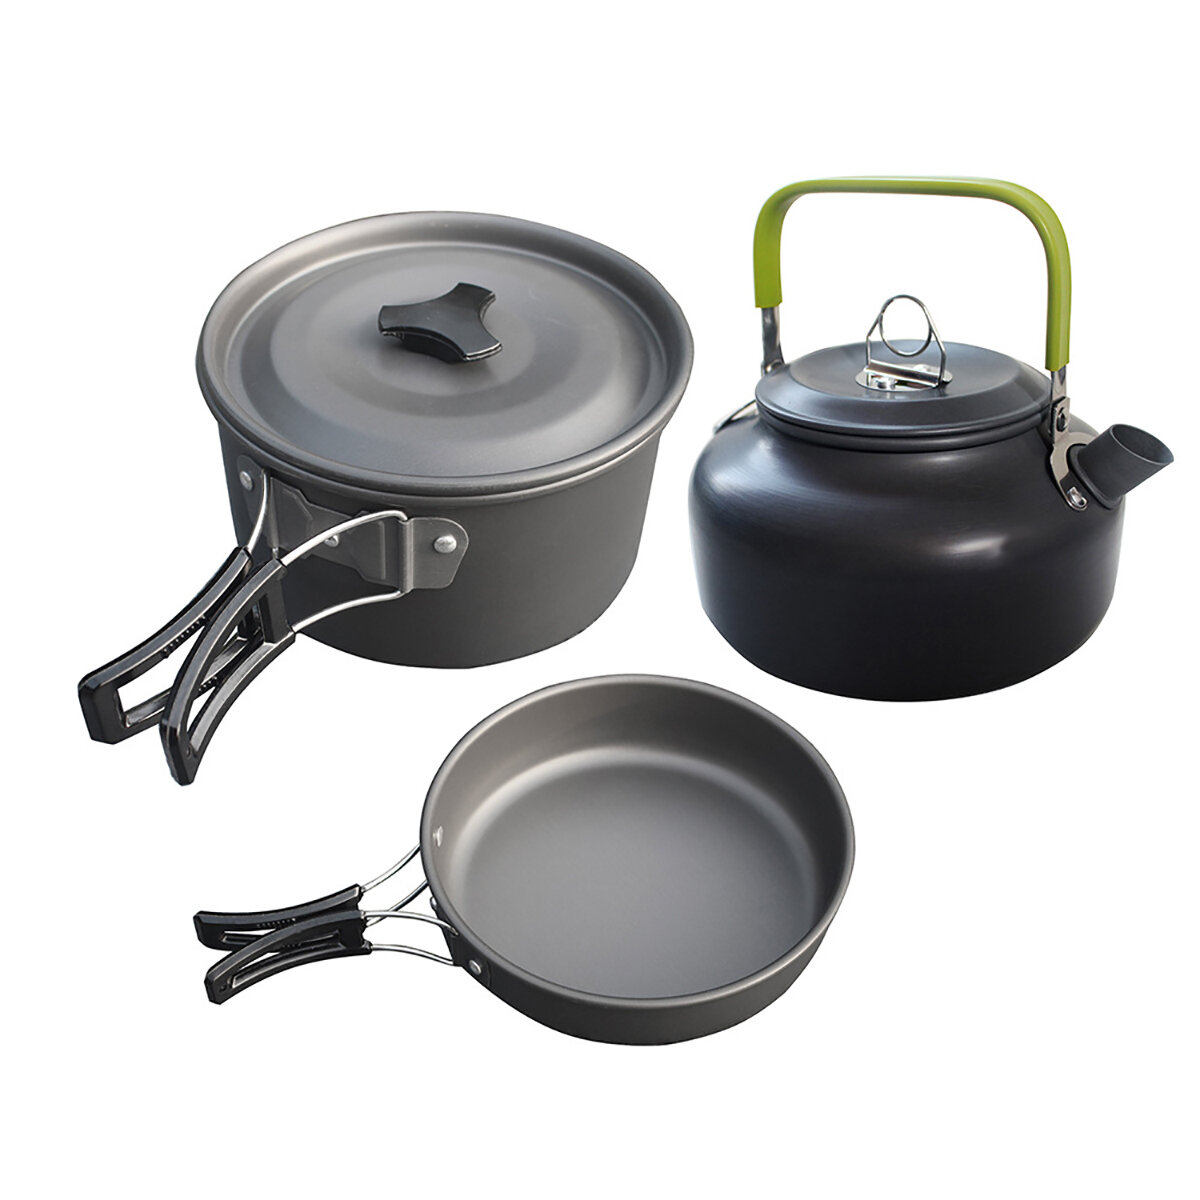 2-3 People 3 Pcs Camping Cookware Cooking Picnic Pot Pan Stove for Outdoor Hiking Travel